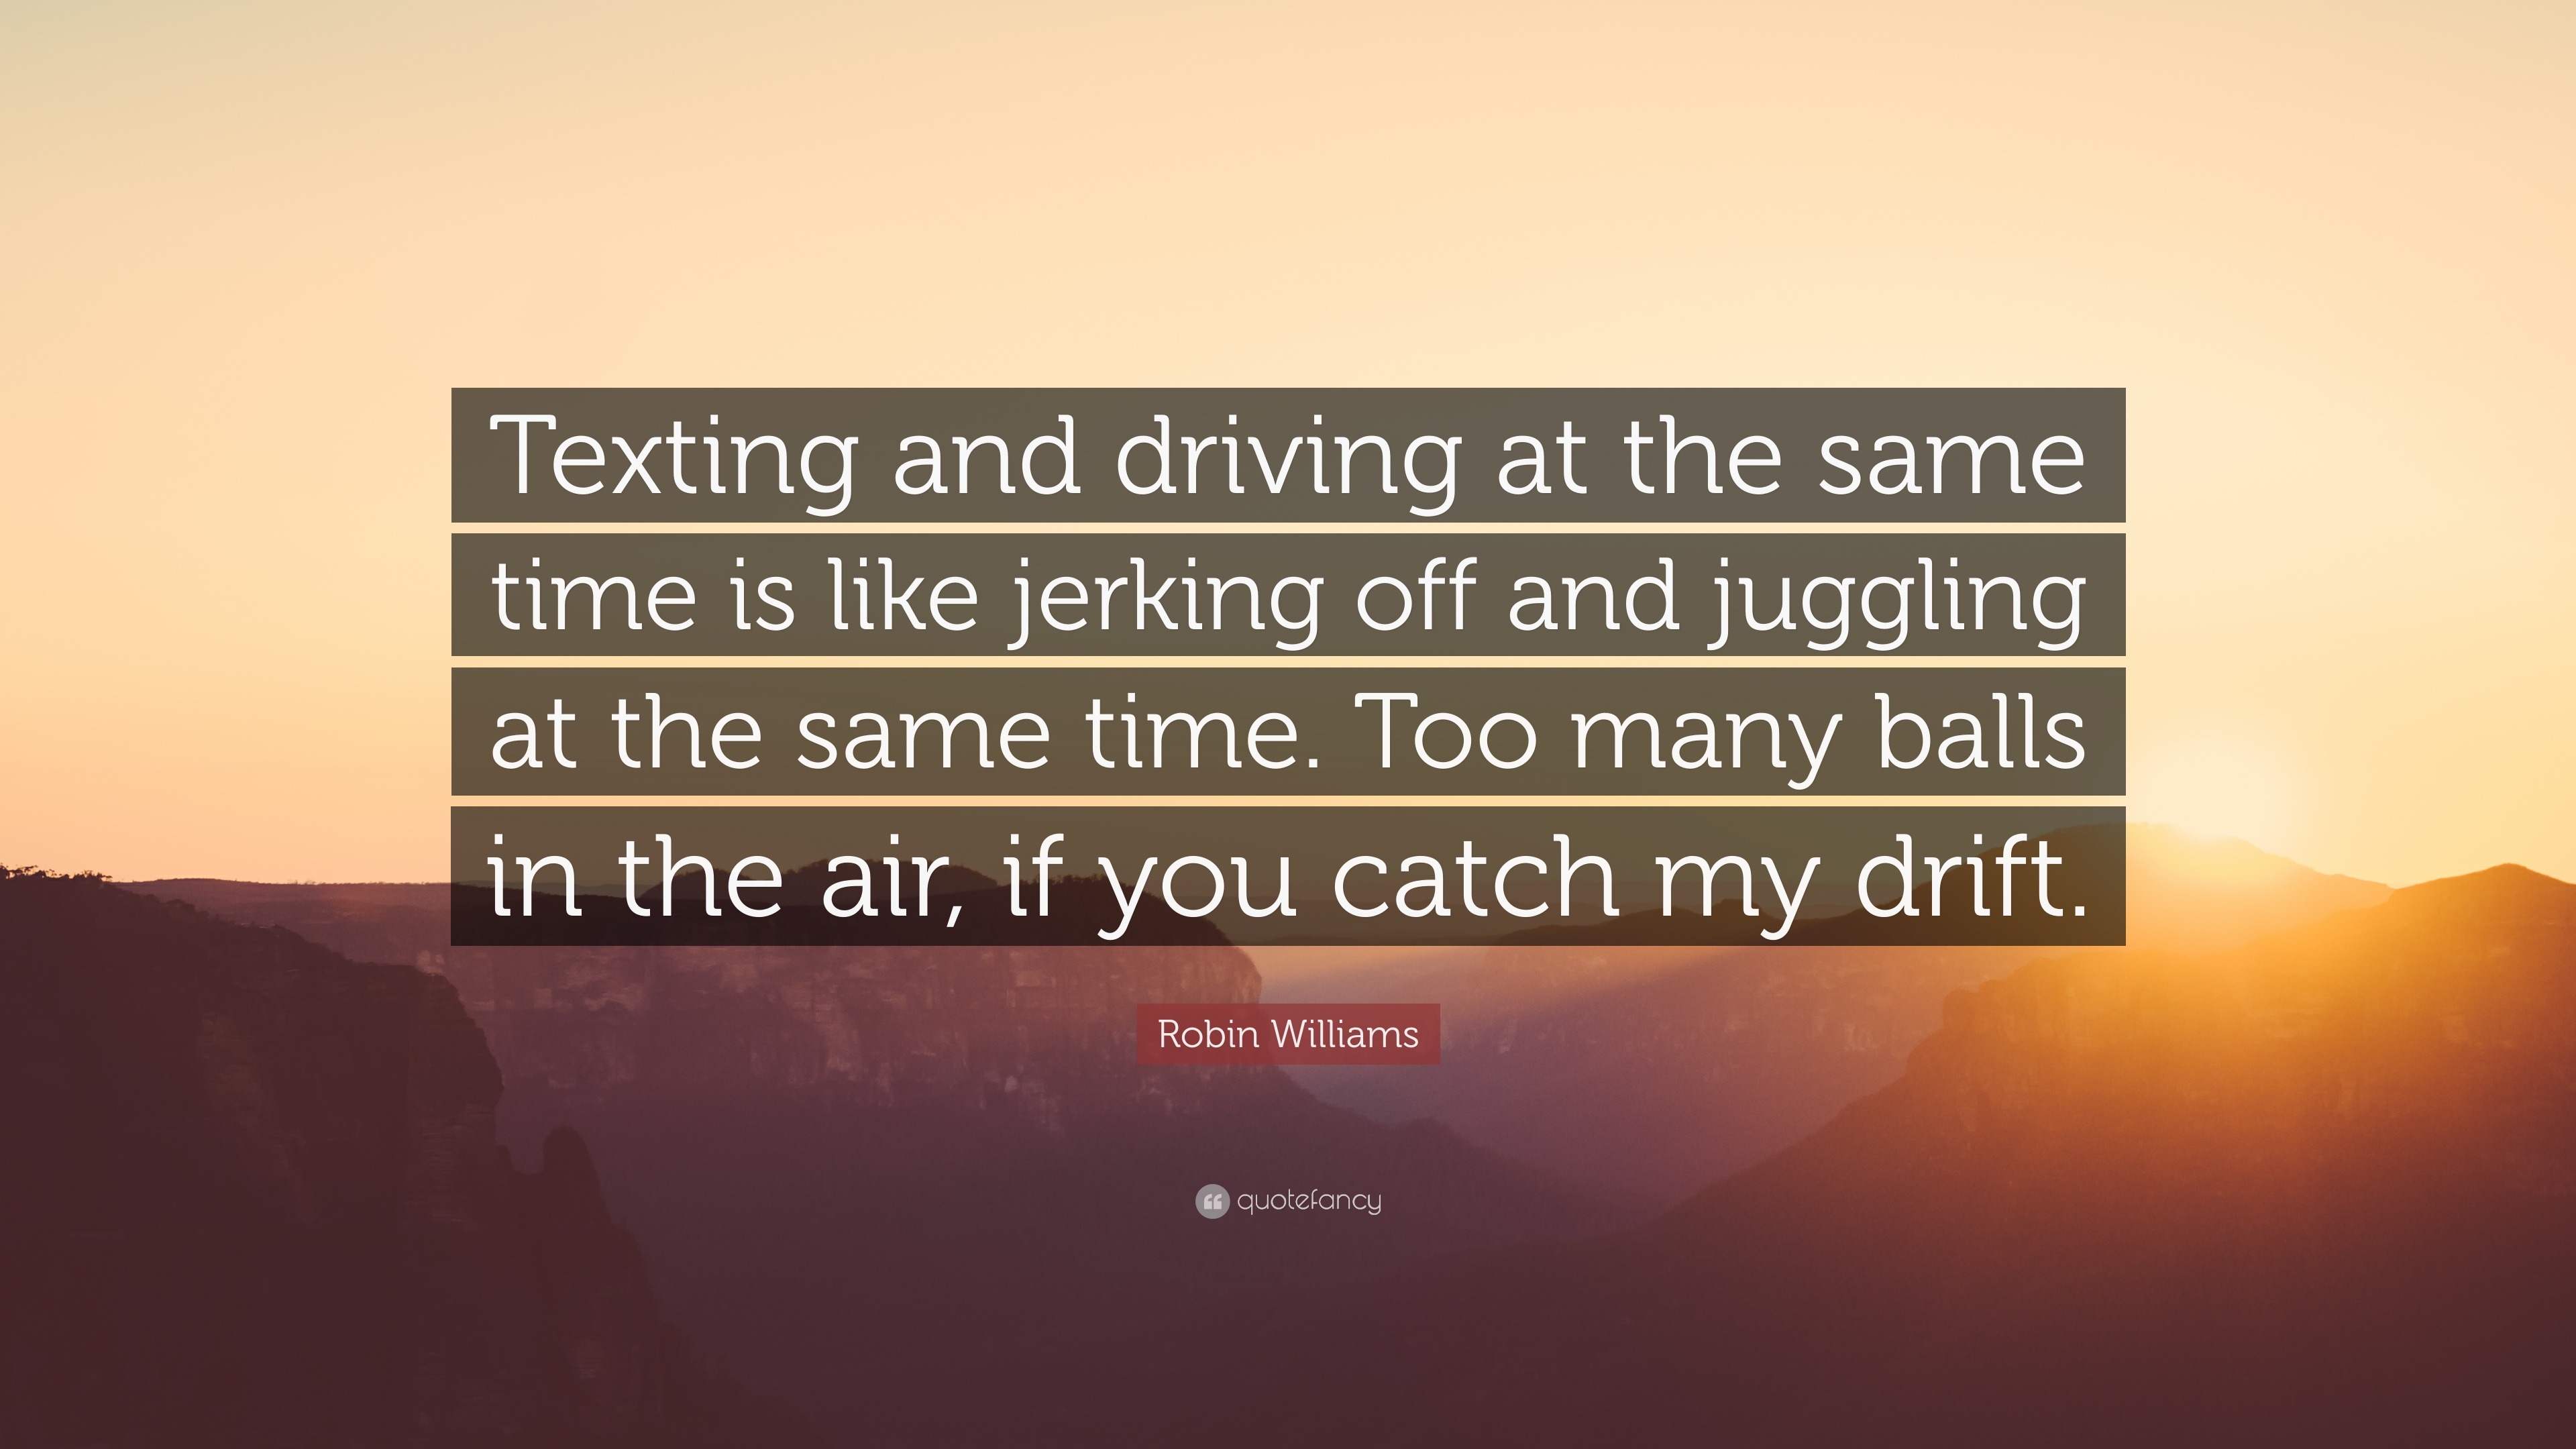 Robin Williams Quote: “Texting and driving at the same time is like